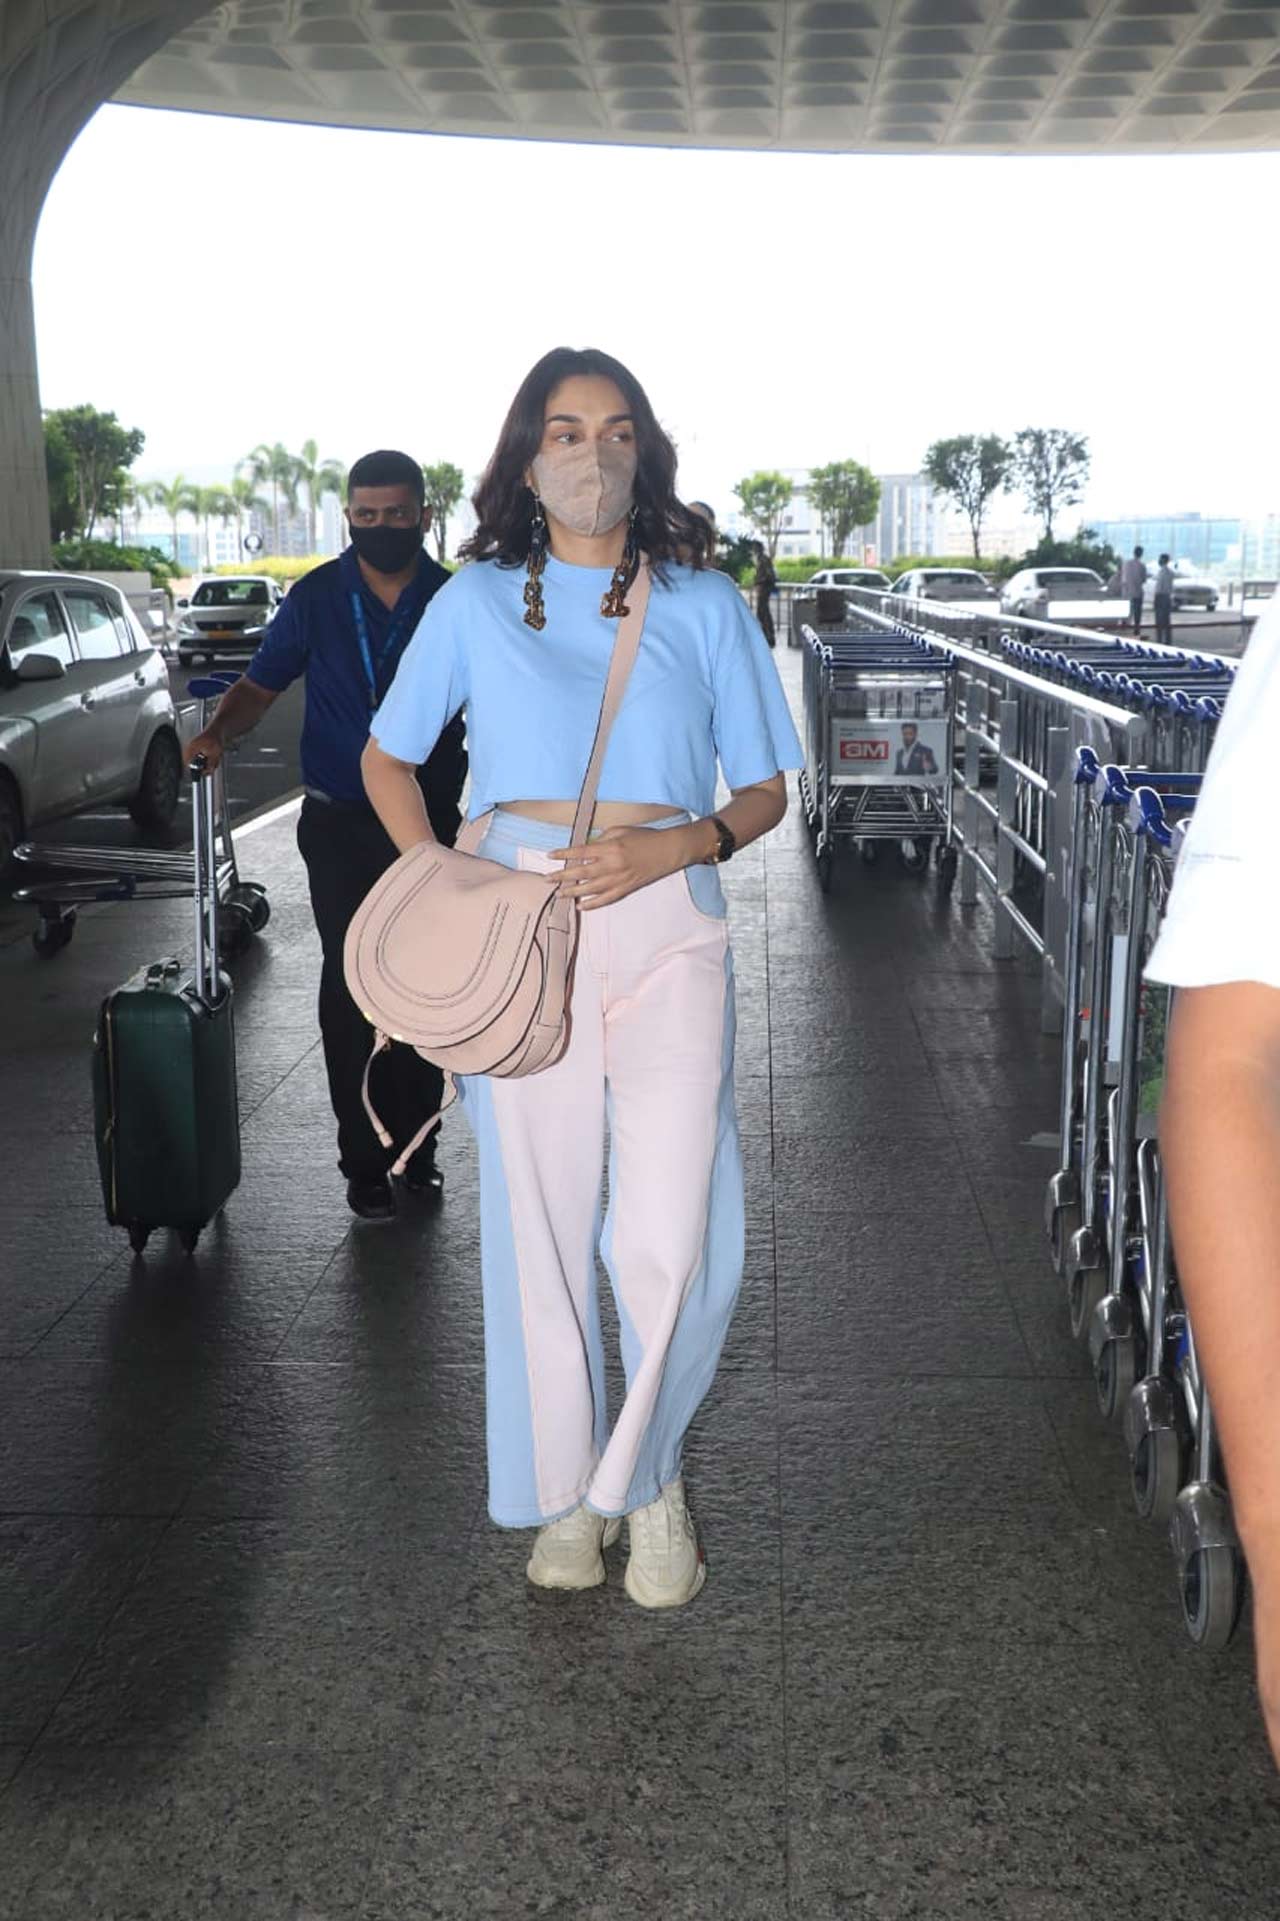 Aditi Rao Hydari's co-ord set was truly a winner as she opted for her airport look. On the work front, Aditi was last seen in Netflix's 'Sardar Ka Grandson', which also starred Arjun Kapoor, Rakul Preet Singh, John Abraham, Neetu Kapoor, among others.